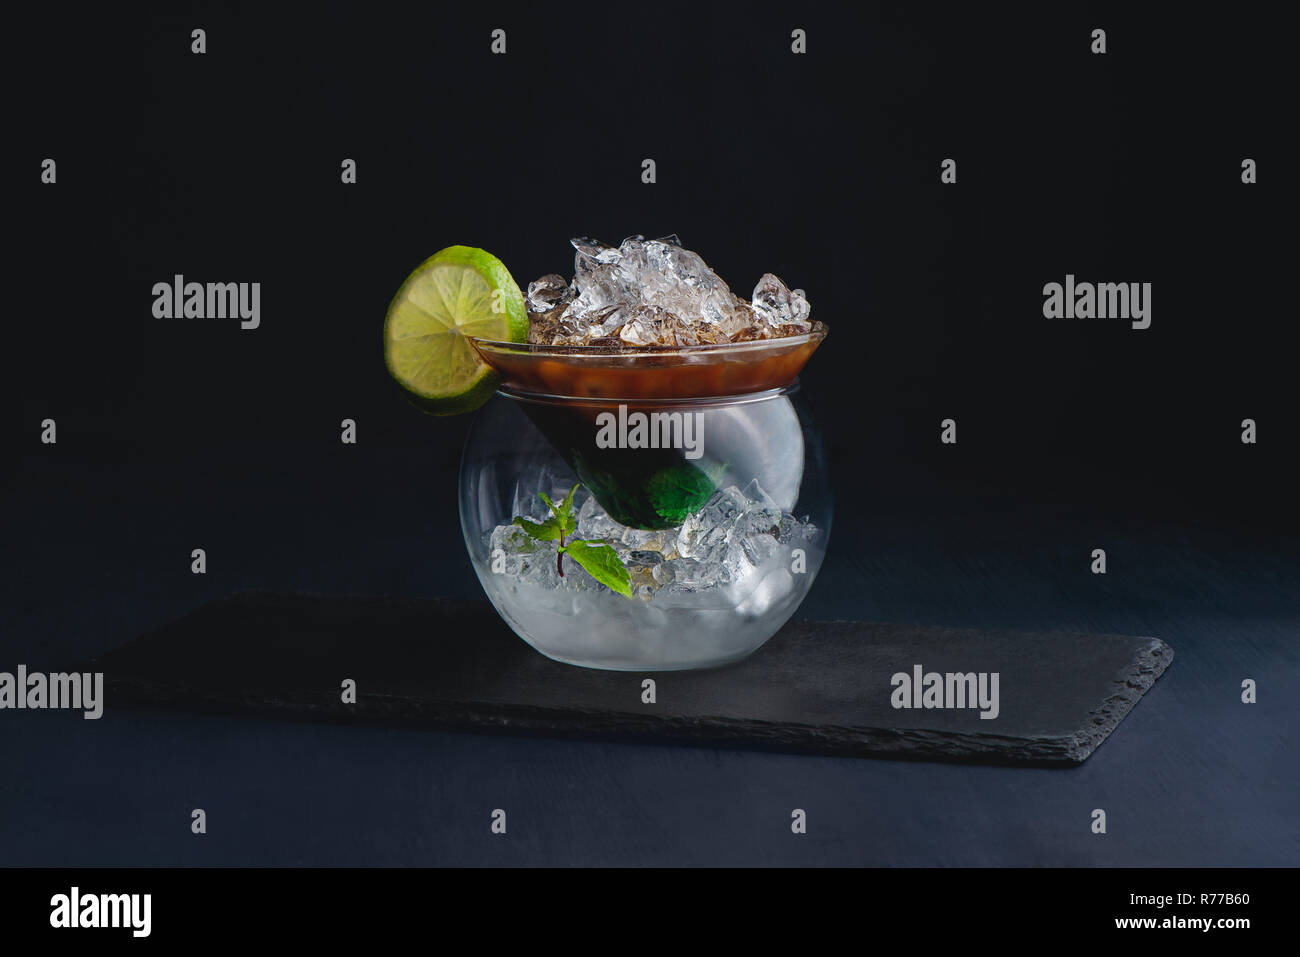 Espresso, mint and lime cocktail in a modern glass bowl. Coffee cold brew concept. Dark background with copy space for a menu. Stock Photo